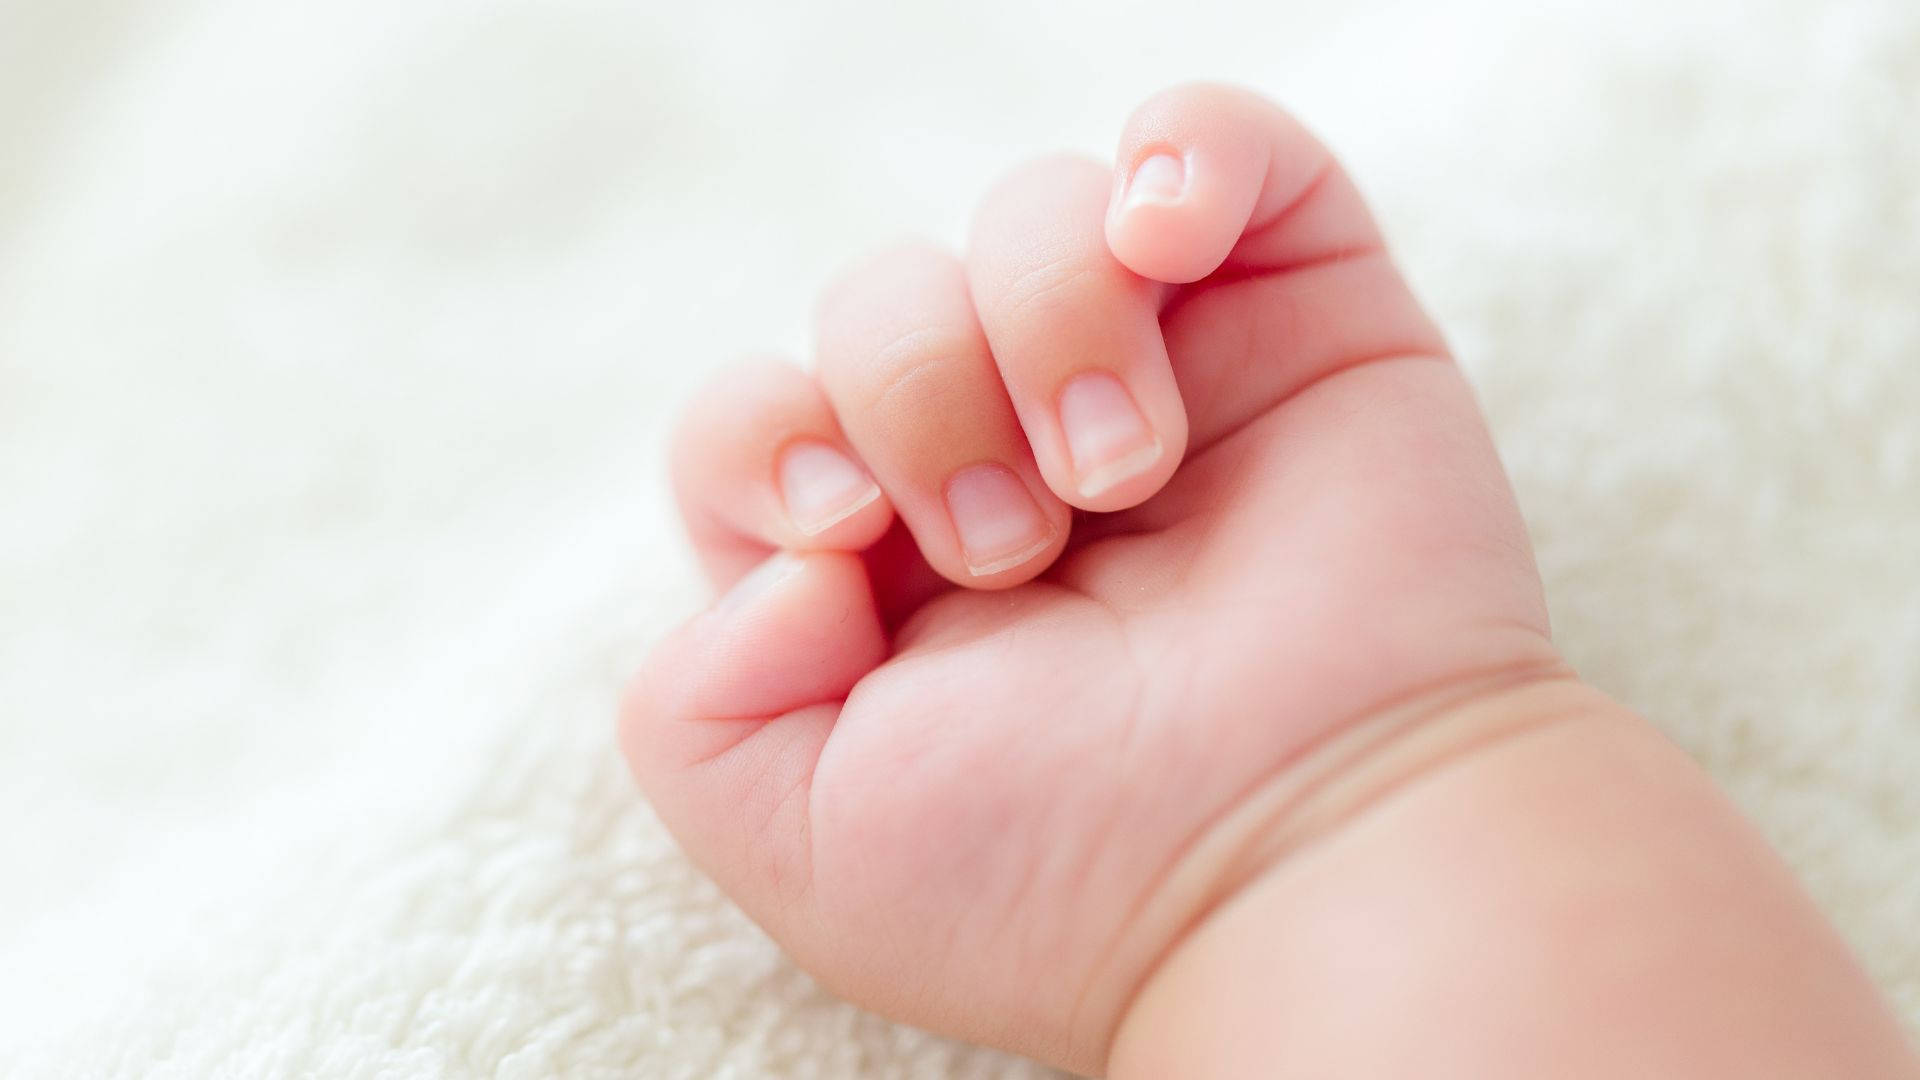 Baby Hand Closed Into A Ball Wallpaper